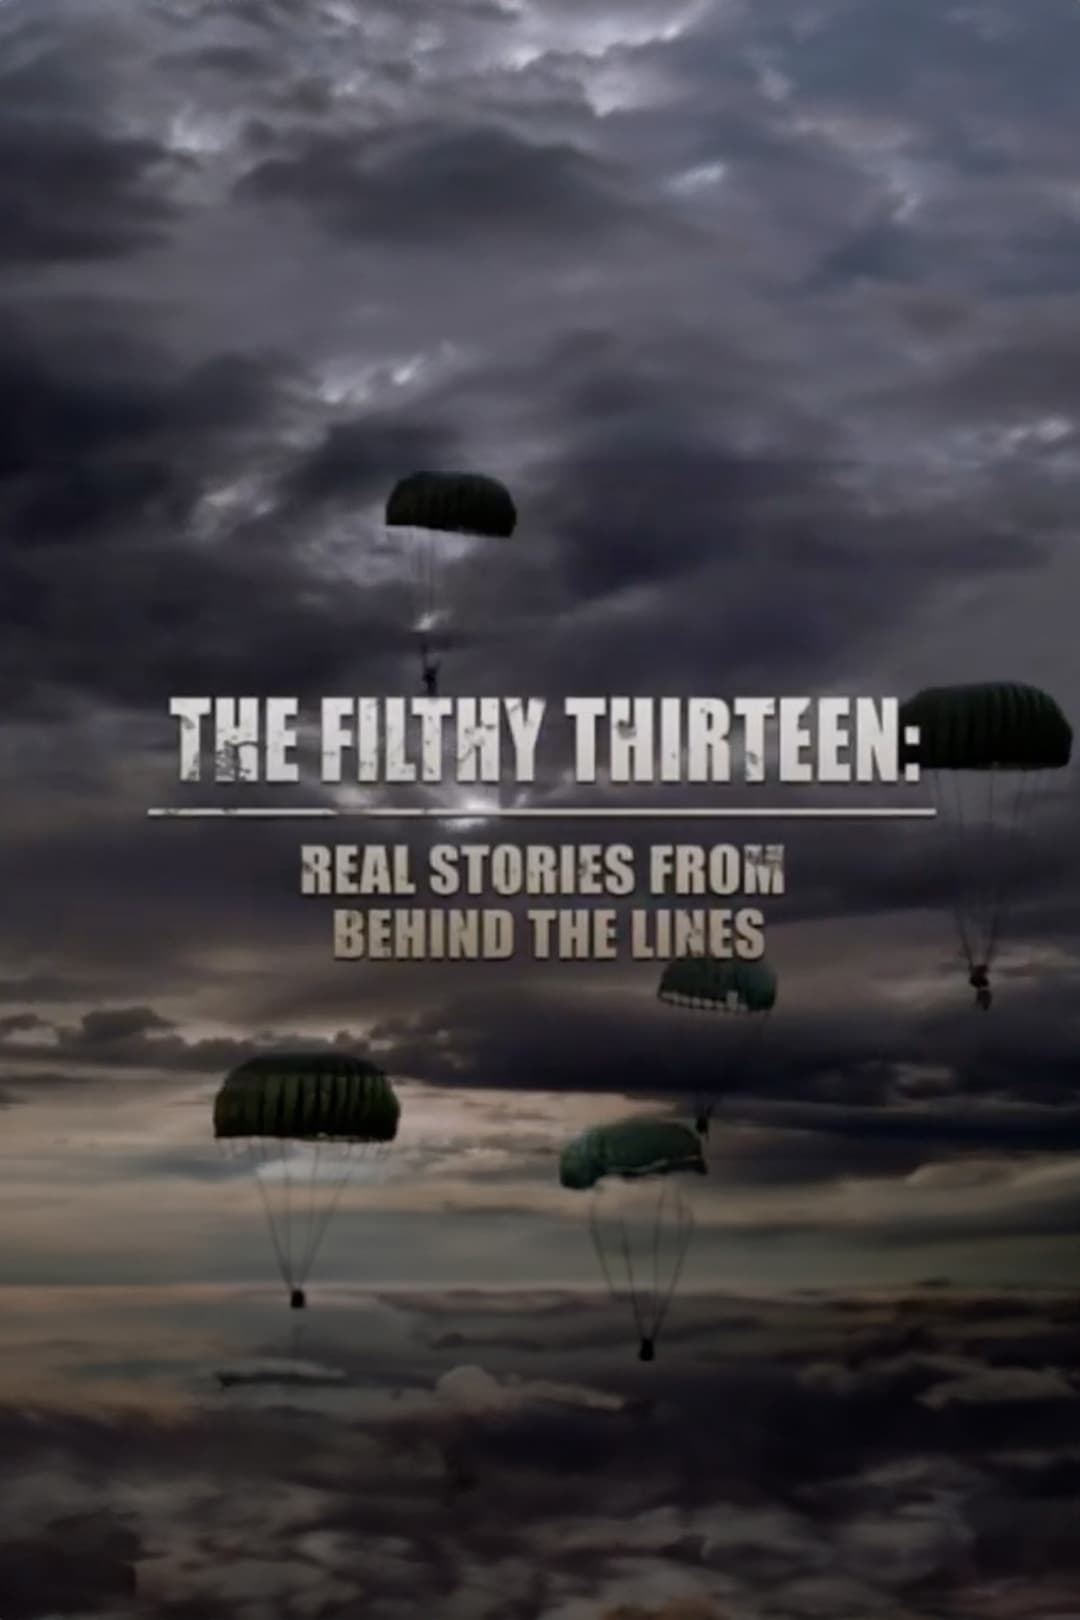 The Filthy Thirteen: Real Stories from Behind the Lines